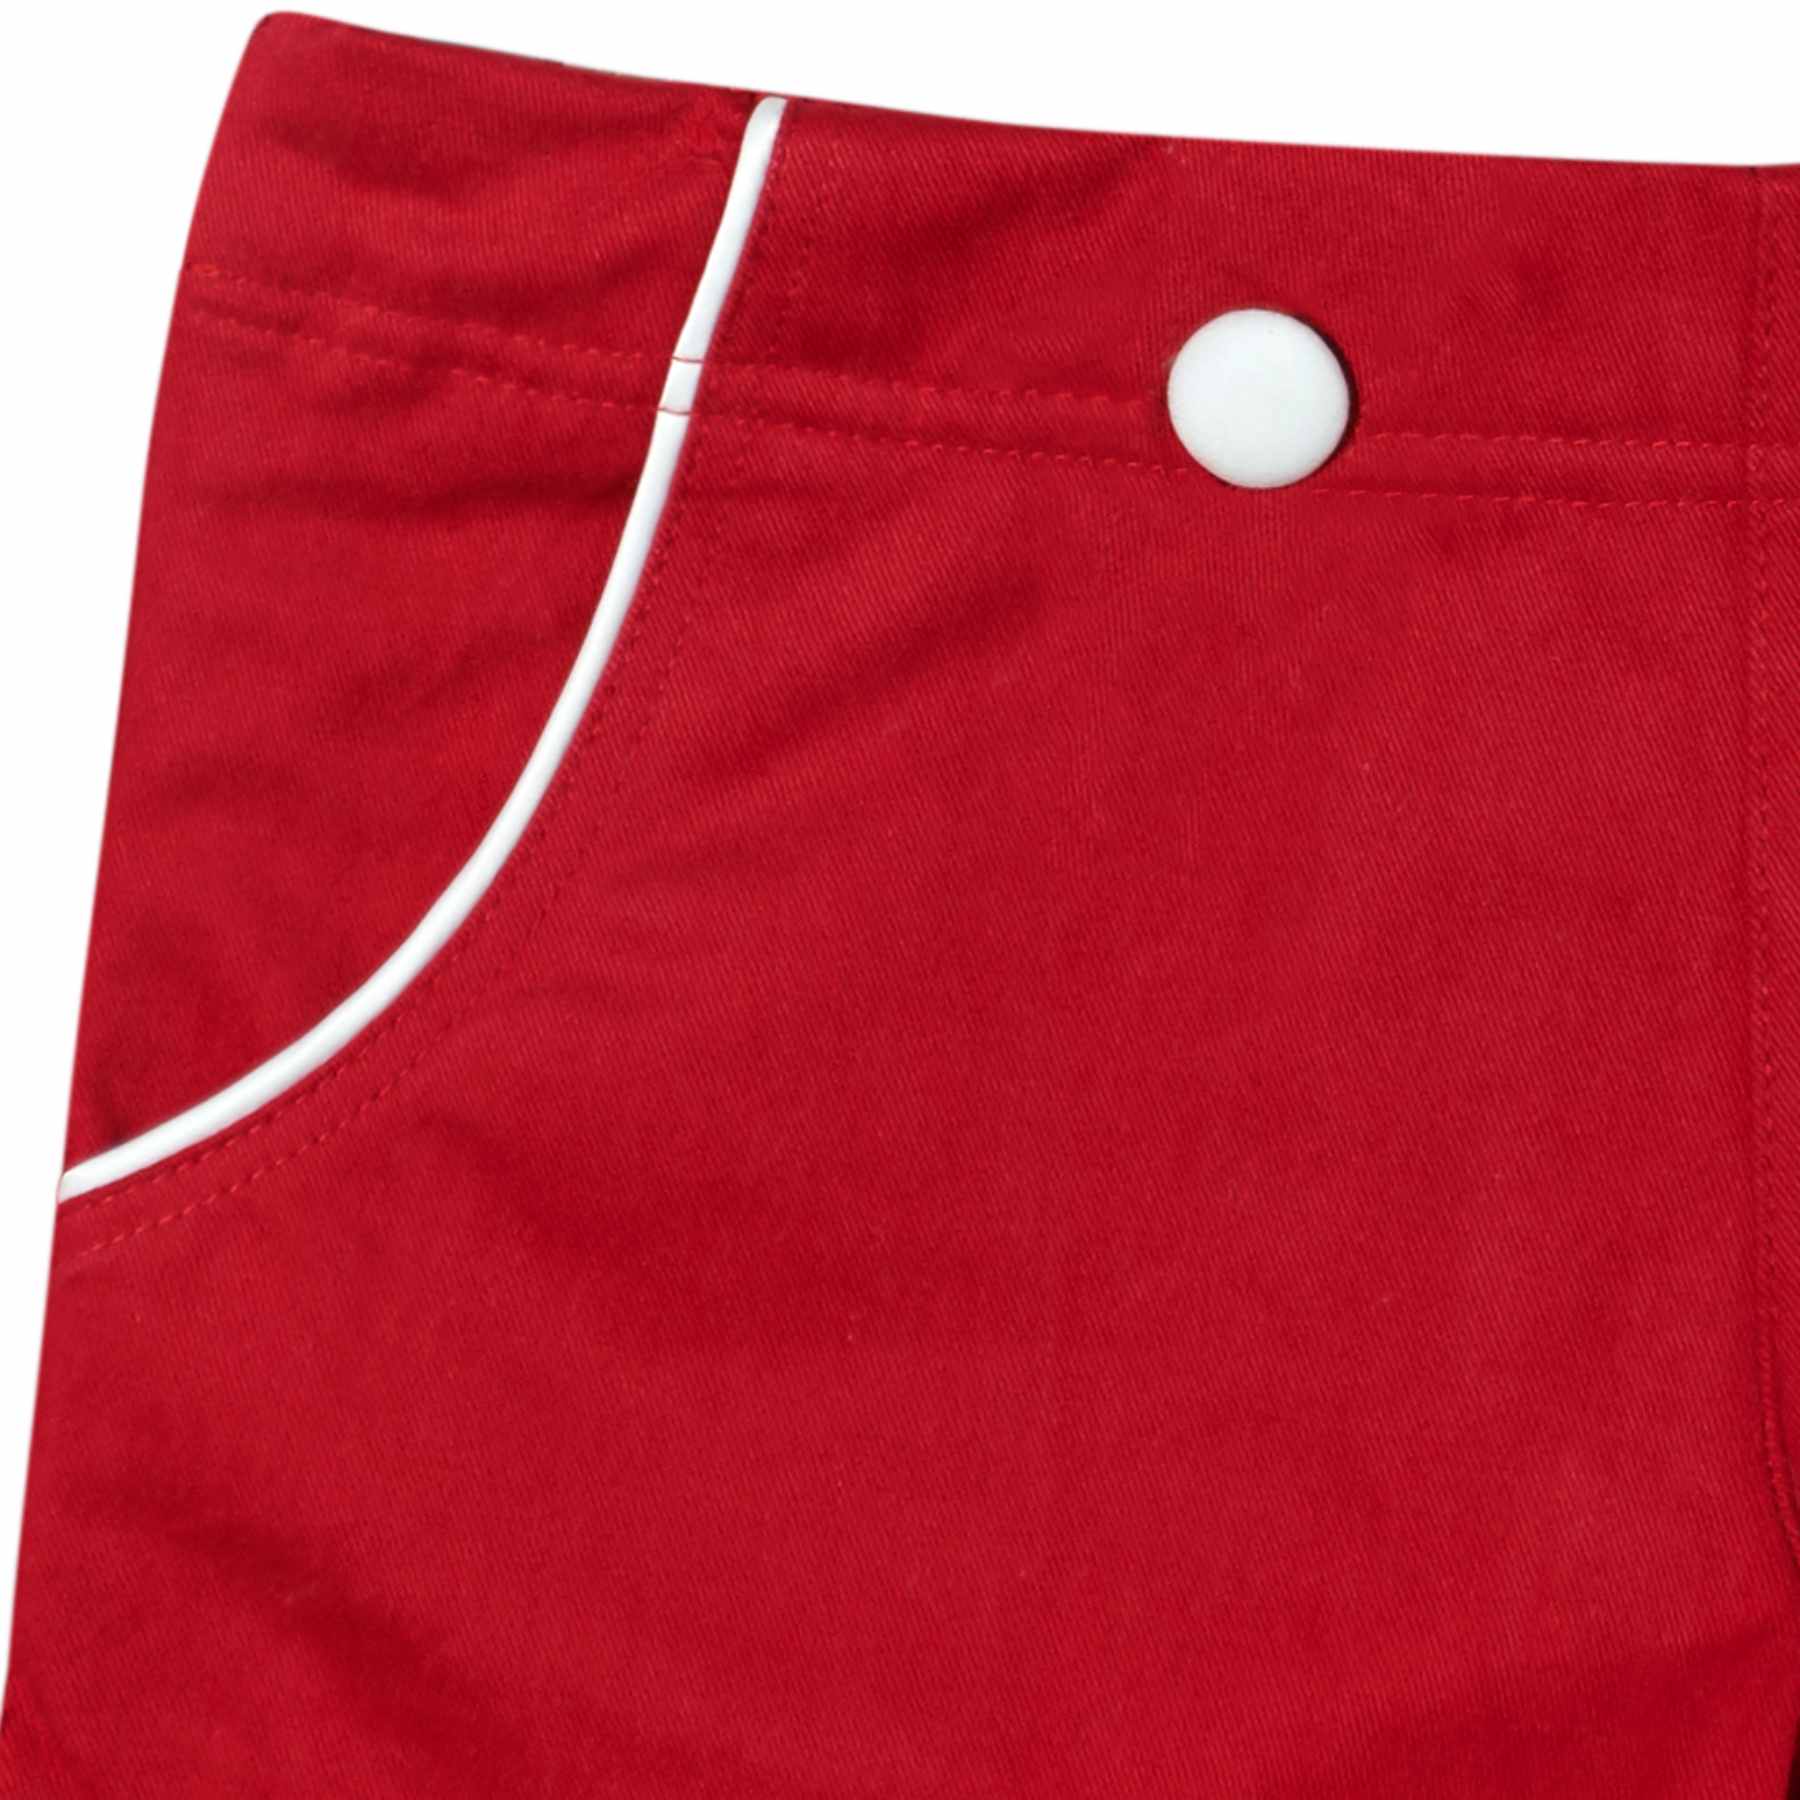 Red sailor shorts for girls with big white buttons. Elegant and trendy shorts for girls from the children's fashion brand LA FAUTE A VOLTAIRE